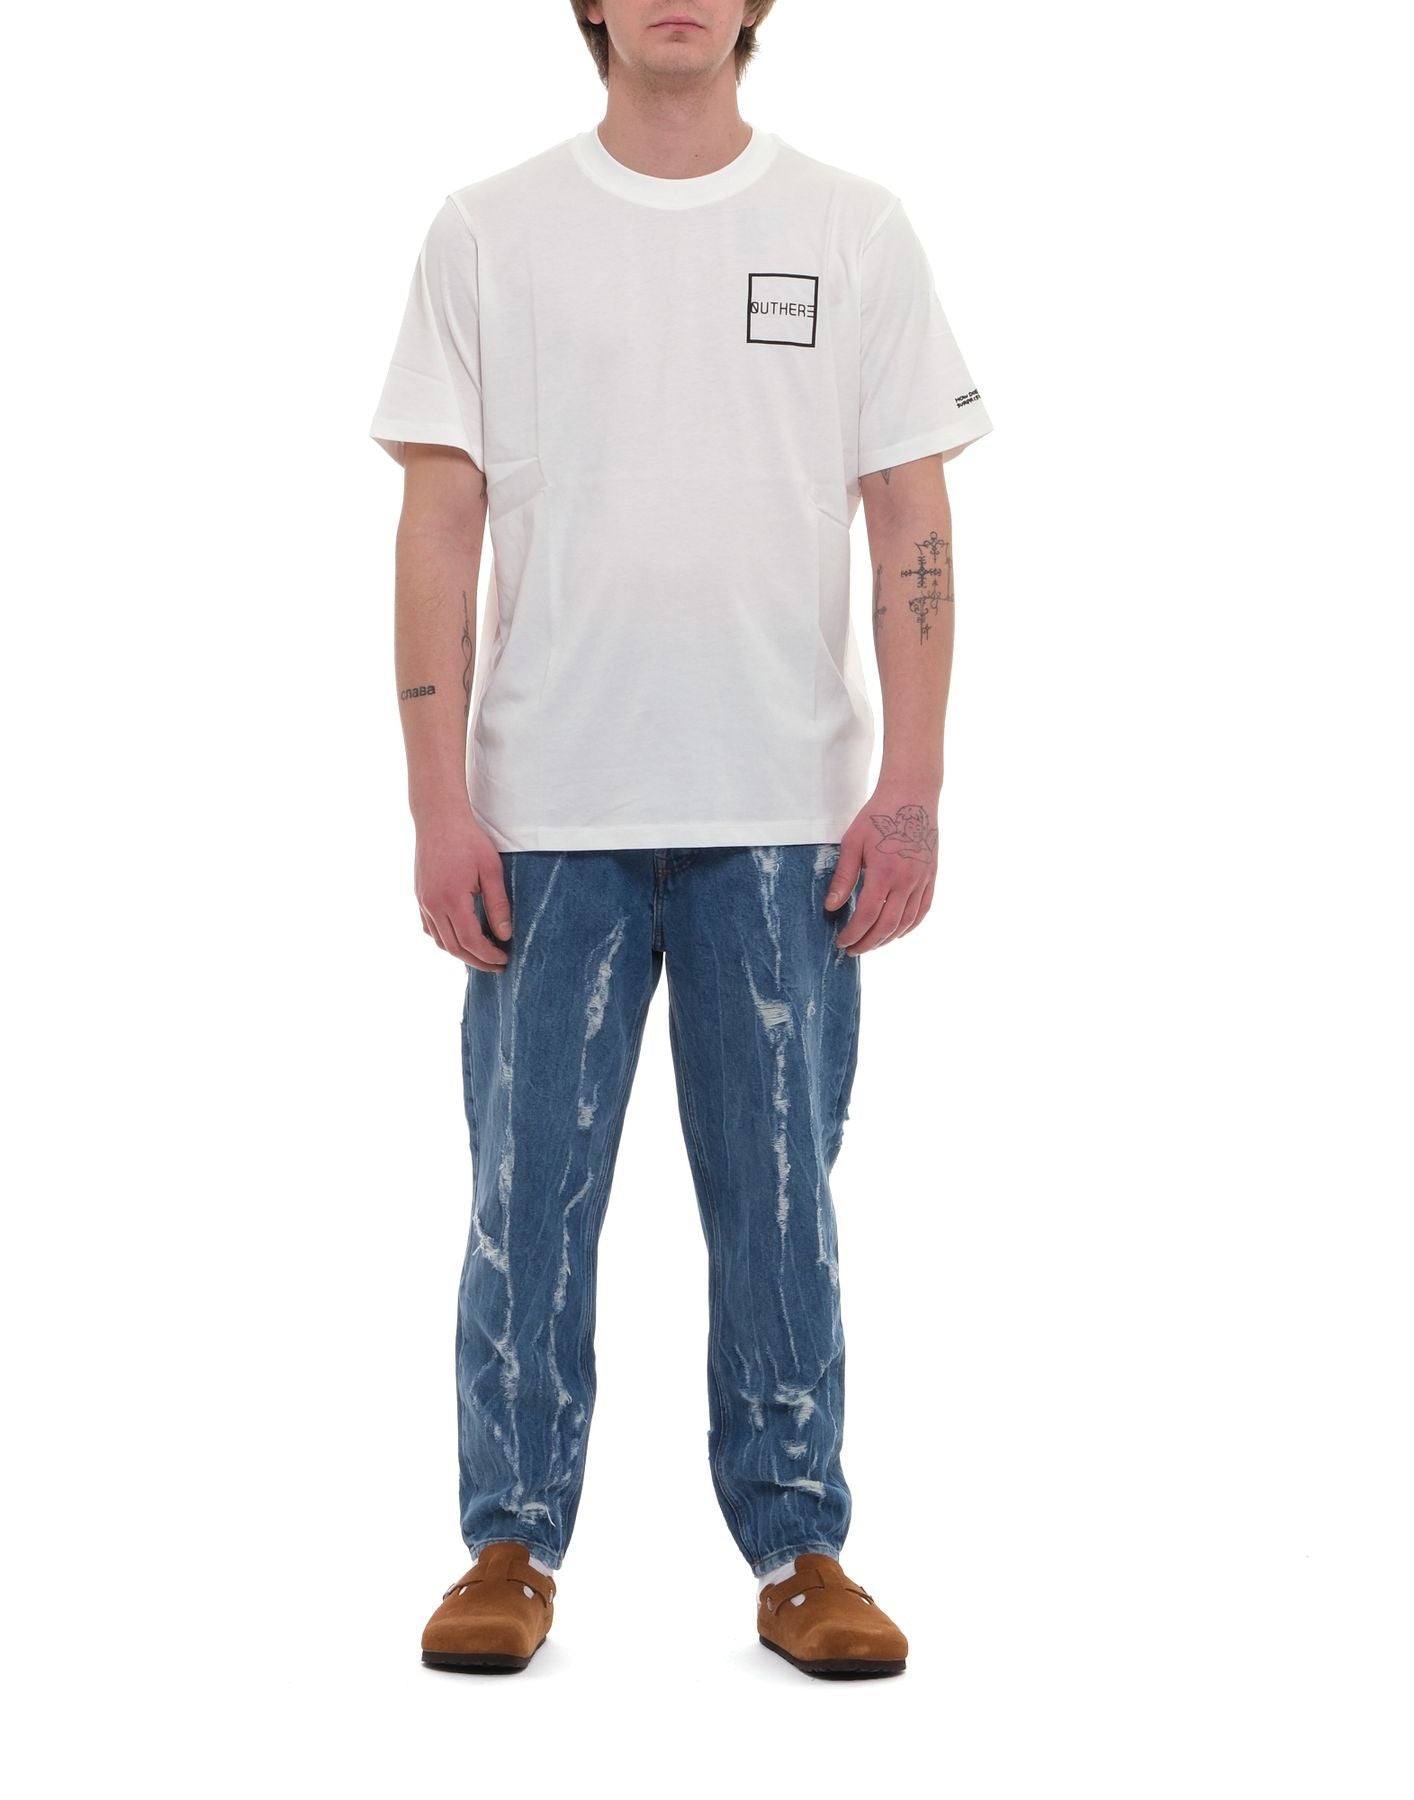 T-shirt man eotm136ag95 blanc out there